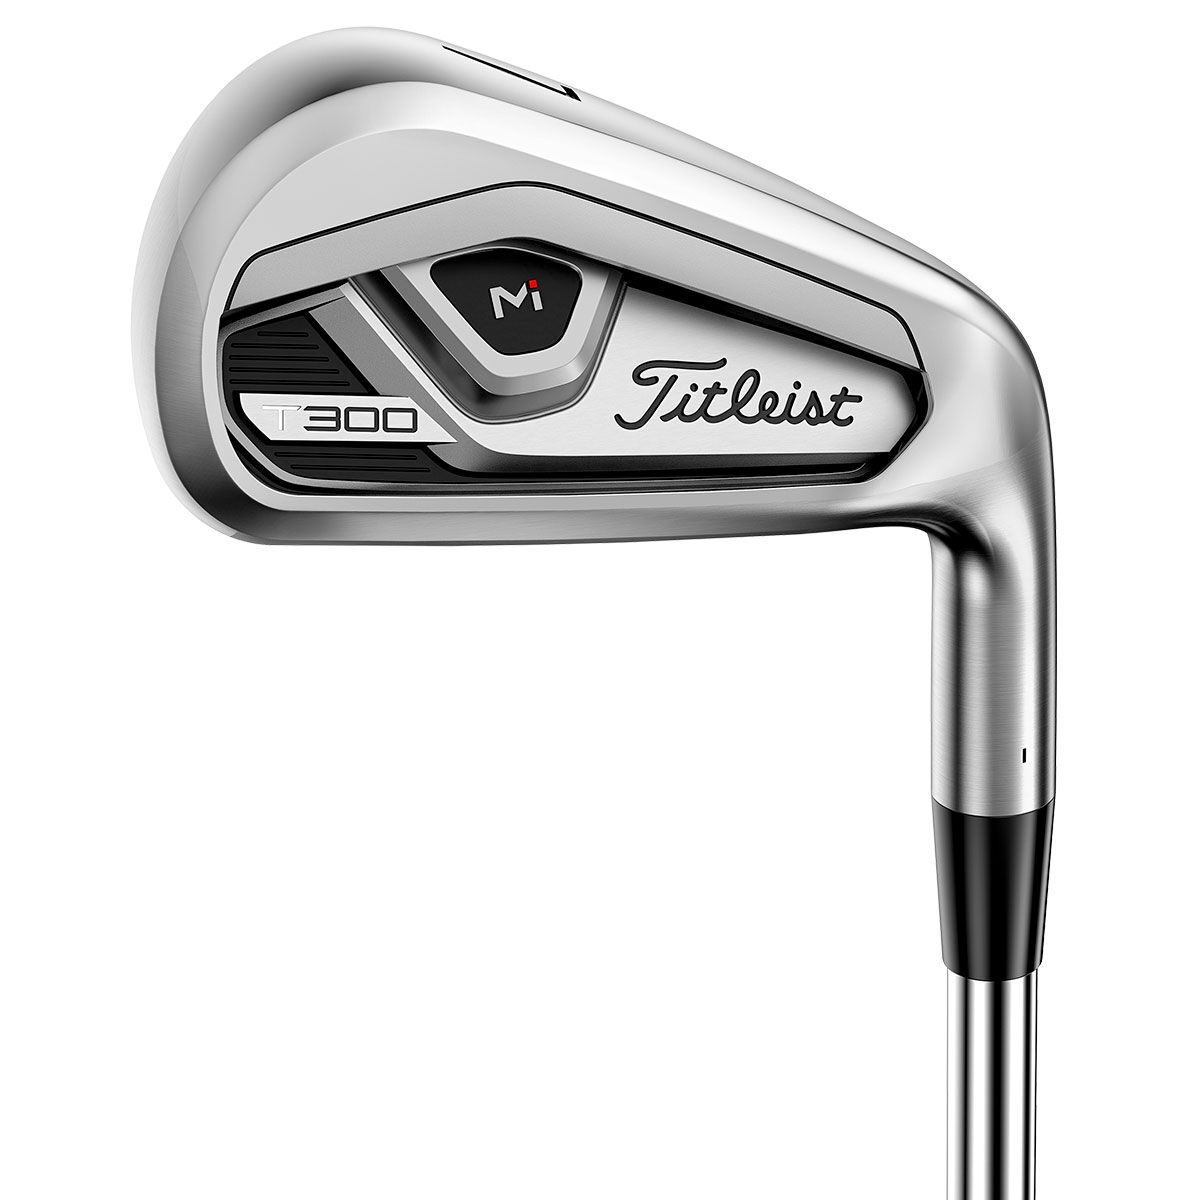 Titleist Silver and Black Printed T300 Steel Golf Irons 2021, Mens, 5-Gw (7 Irons), Left Hand, Steel | American Golf, Size: Regular